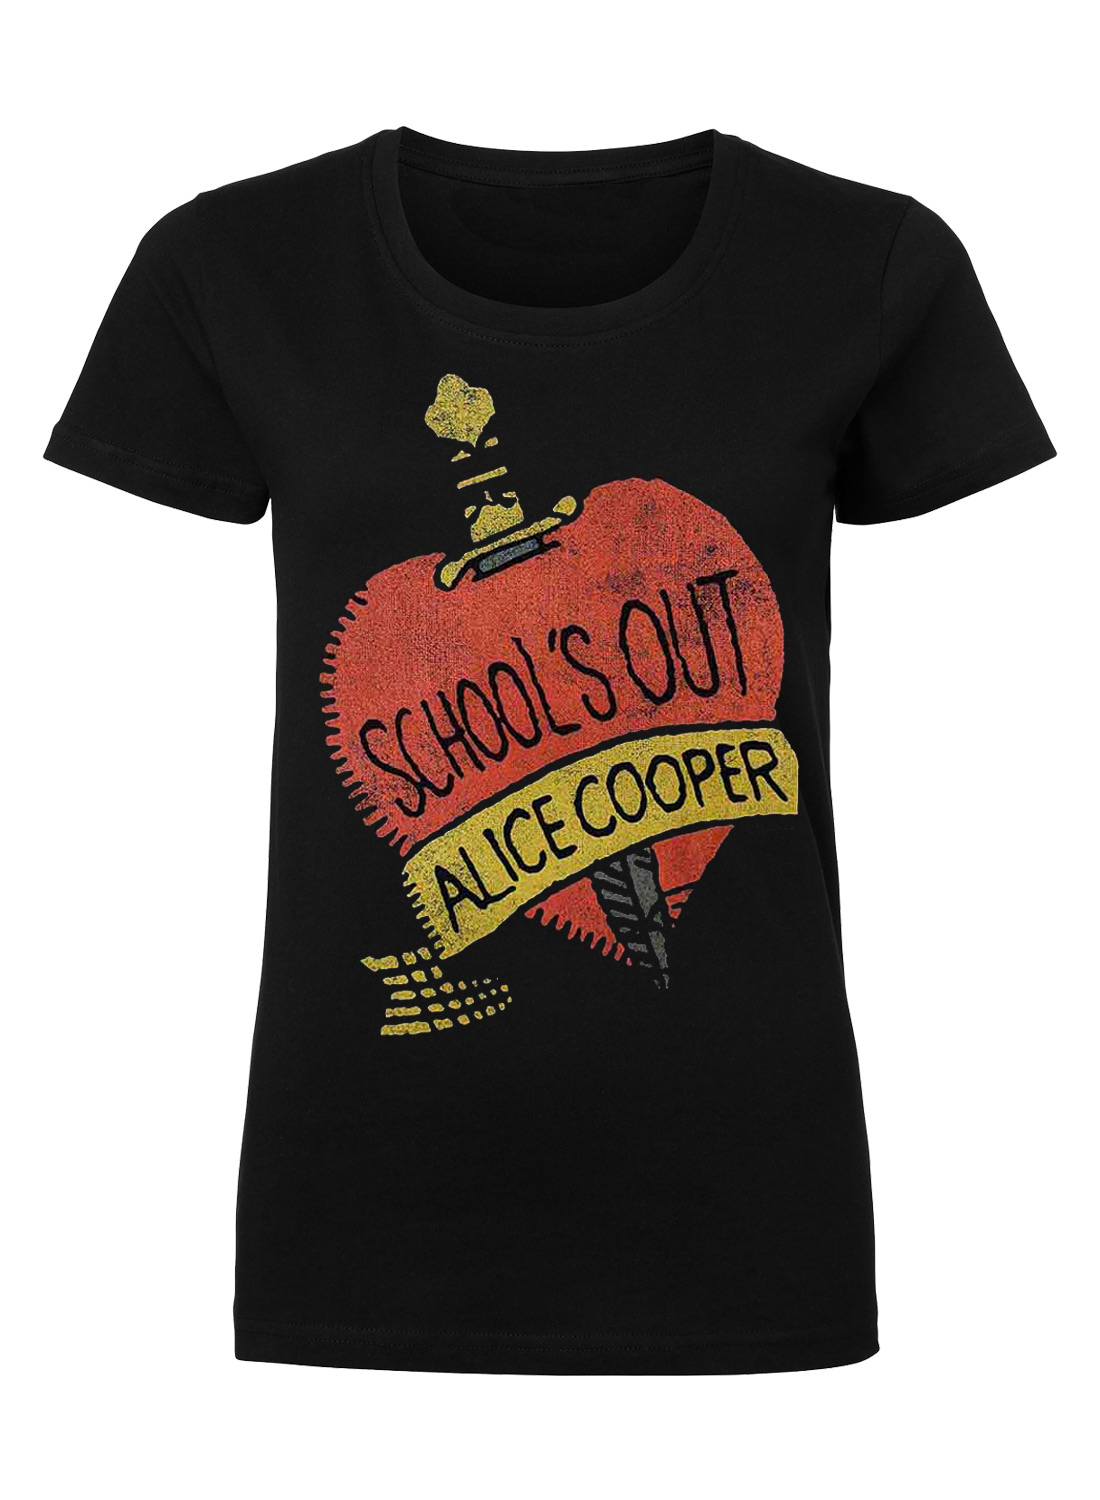 Alice Cooper School's Out Girly T